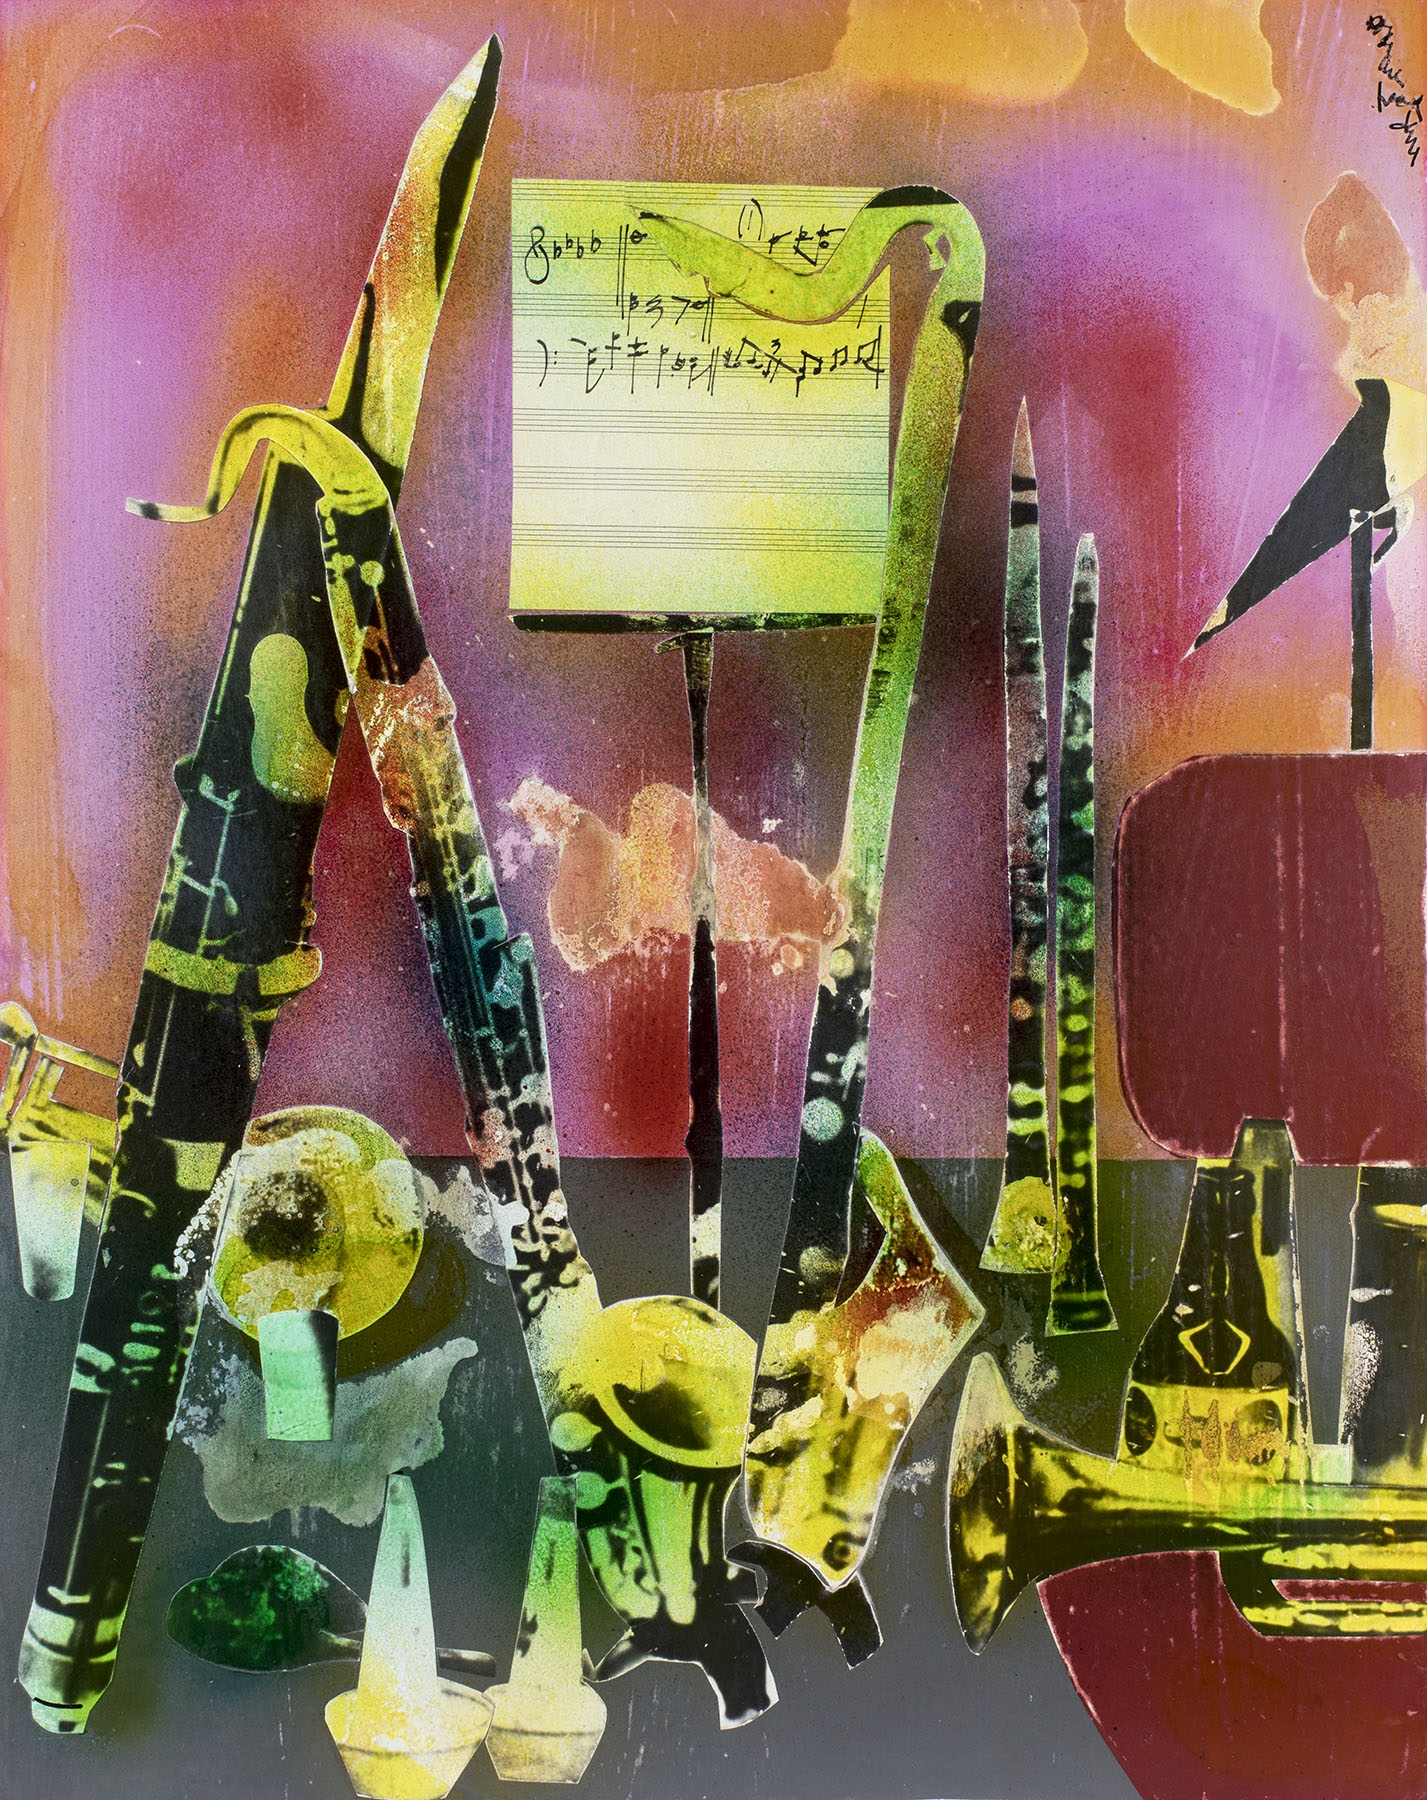 Of the Blues: Intermission Still-Life, Instruments of Dixieland, 1964&amp;nbsp;
Mixed media collage of various papers on board
28 x 22 in.
Enquire